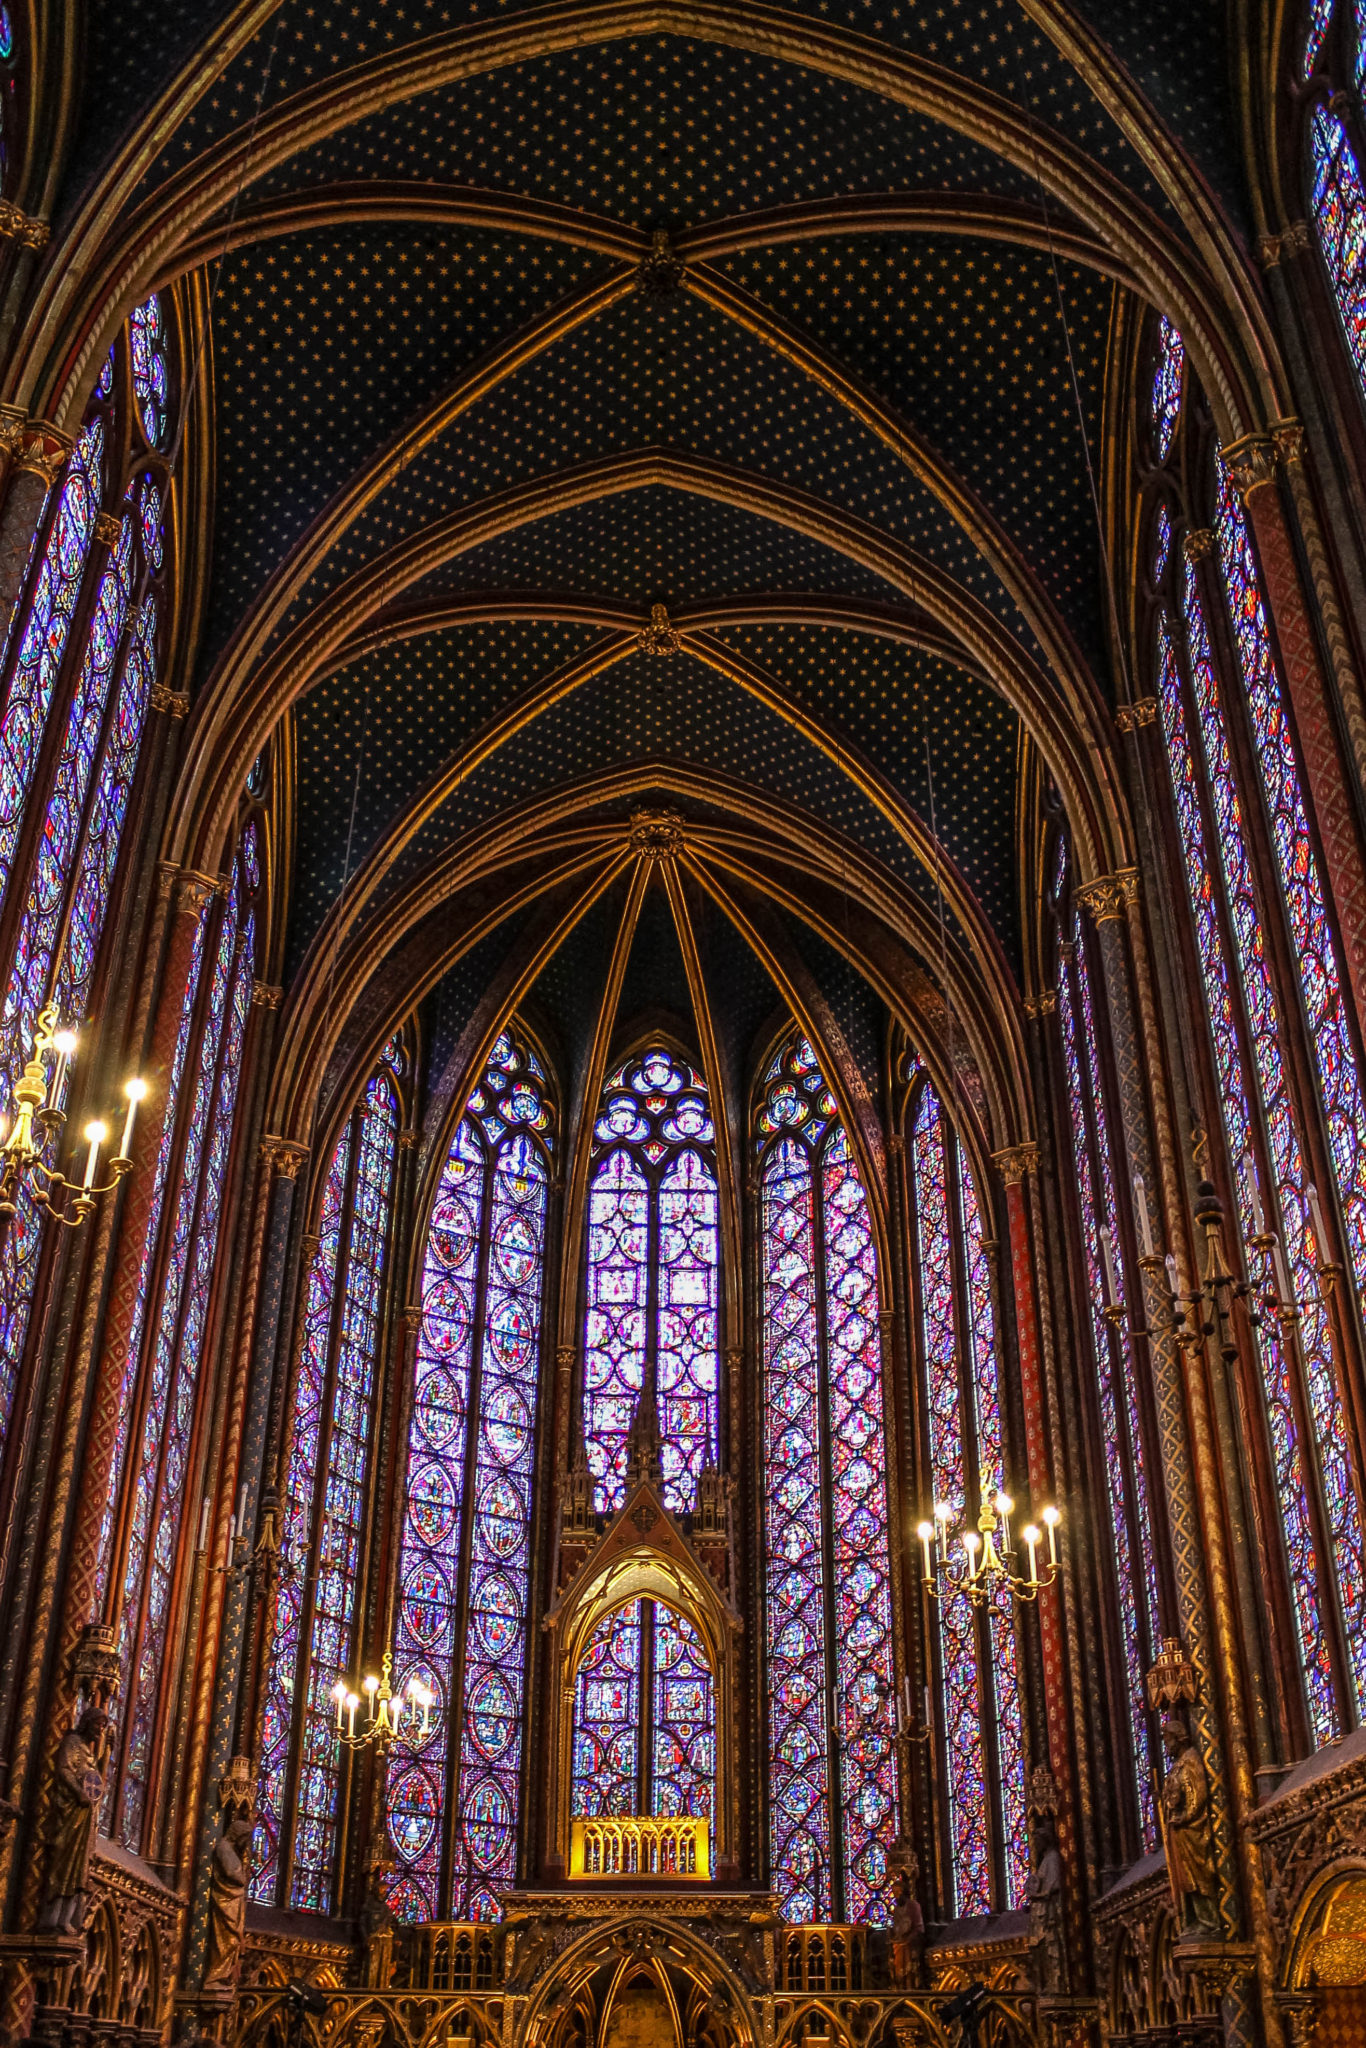 Interior of Sainte Chapelle in Paris France. Stained glass windows surround the entire buidling